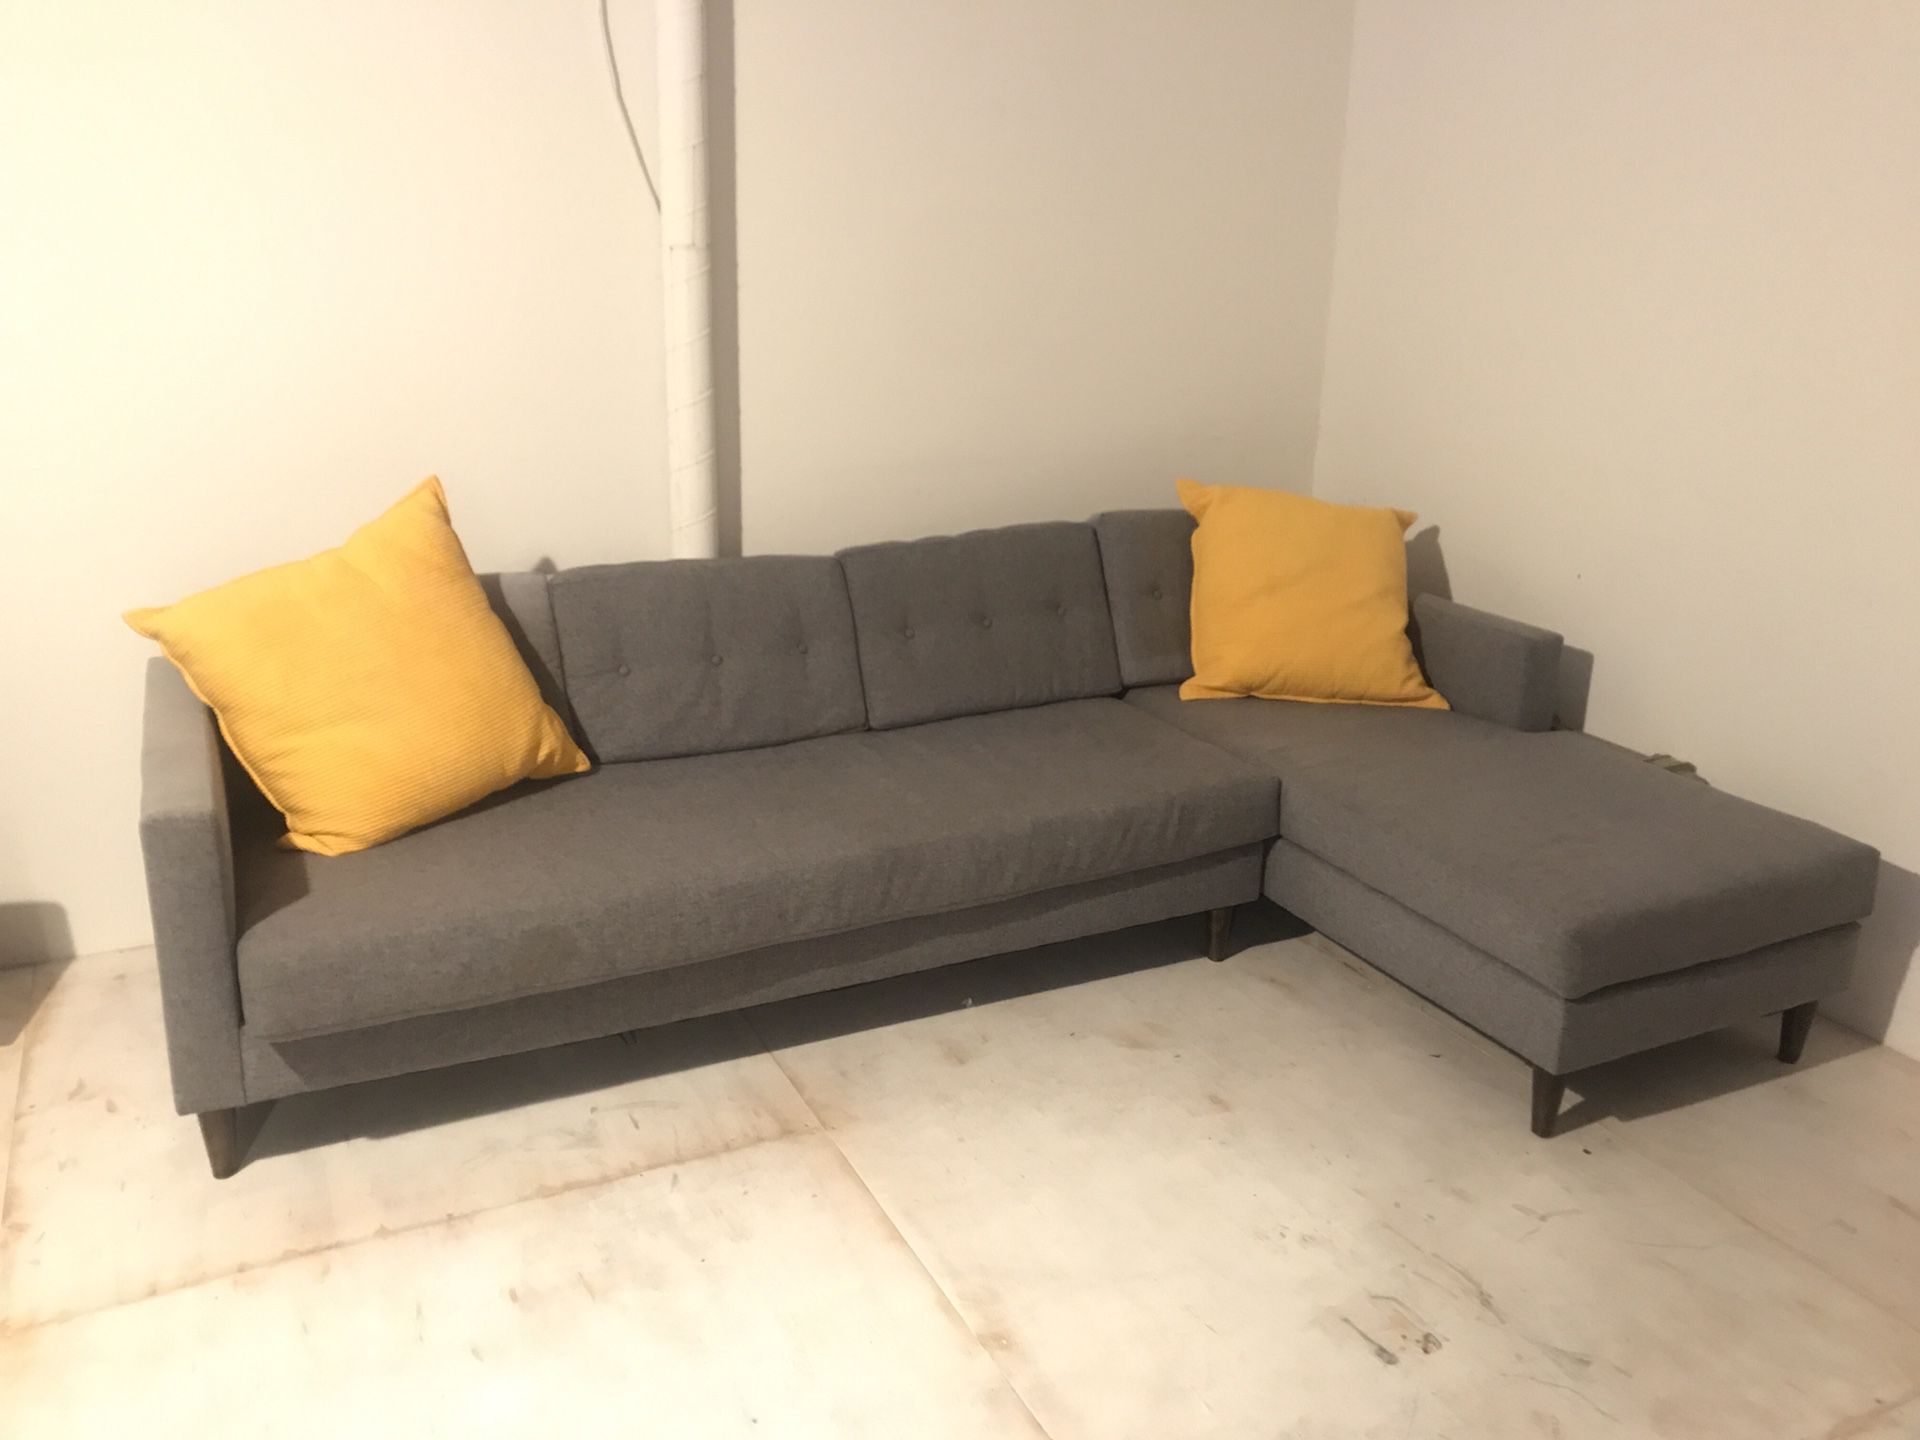 Modern sectional couch - grey fabric